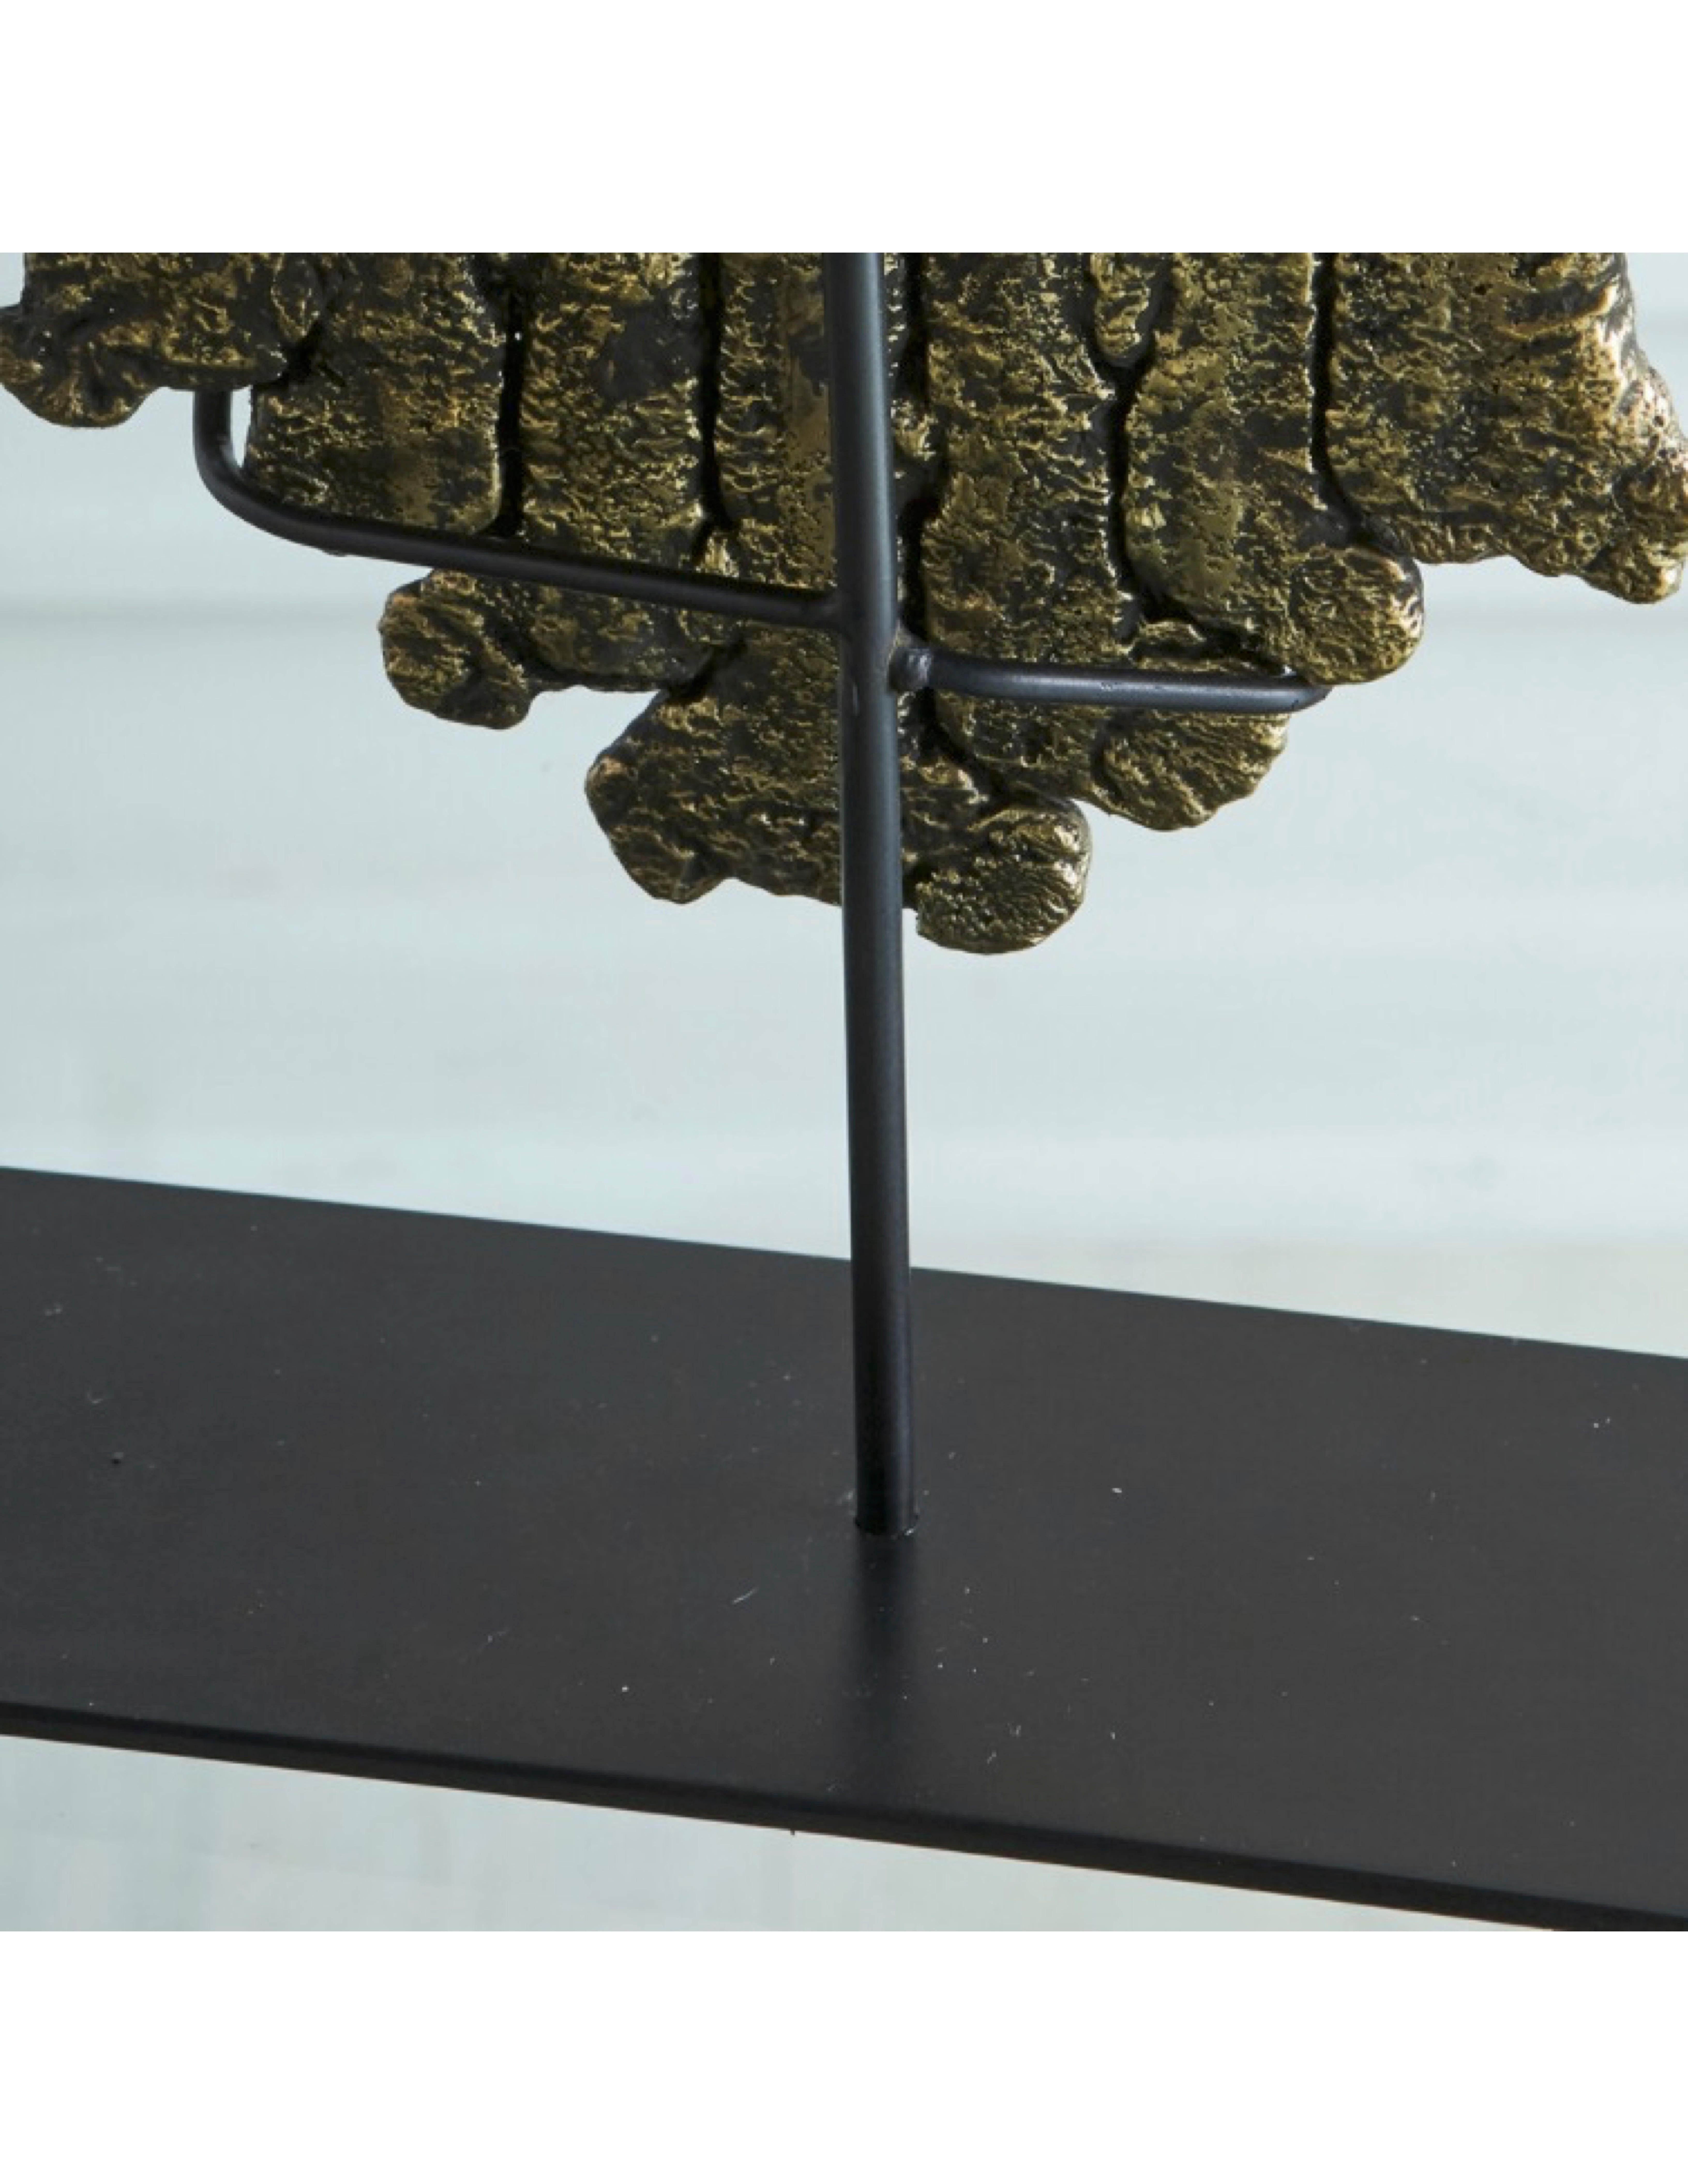 A bespoke and beautifully textured sculpture cast from molten brass and displayed on an iron stand. Made in Chicago by Circa 3230.